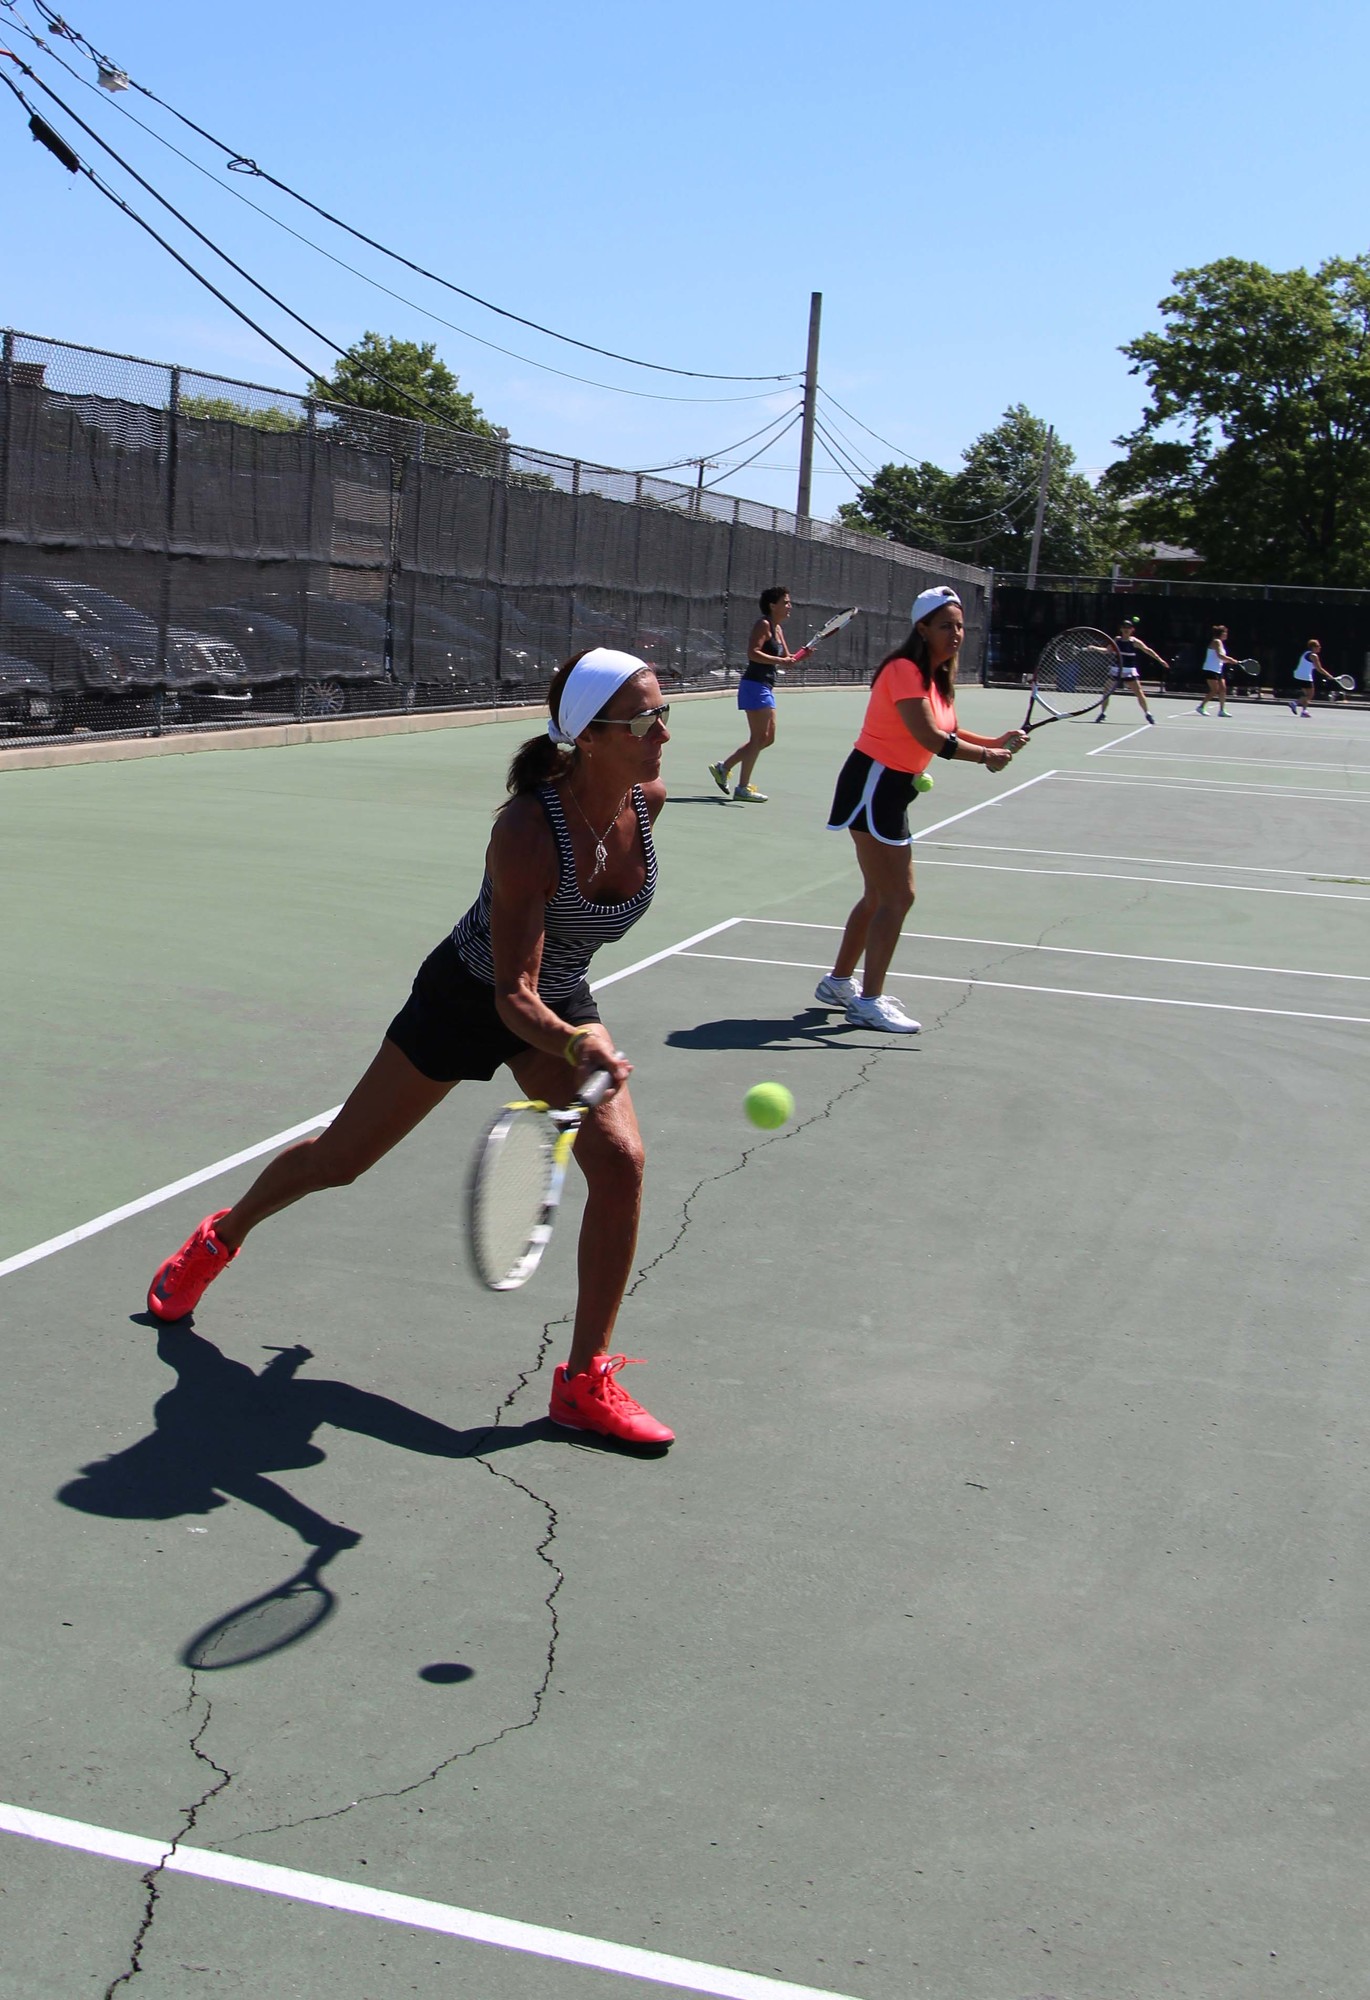 Tammy Sanders and Felice Margolis played in the doubles tournament.